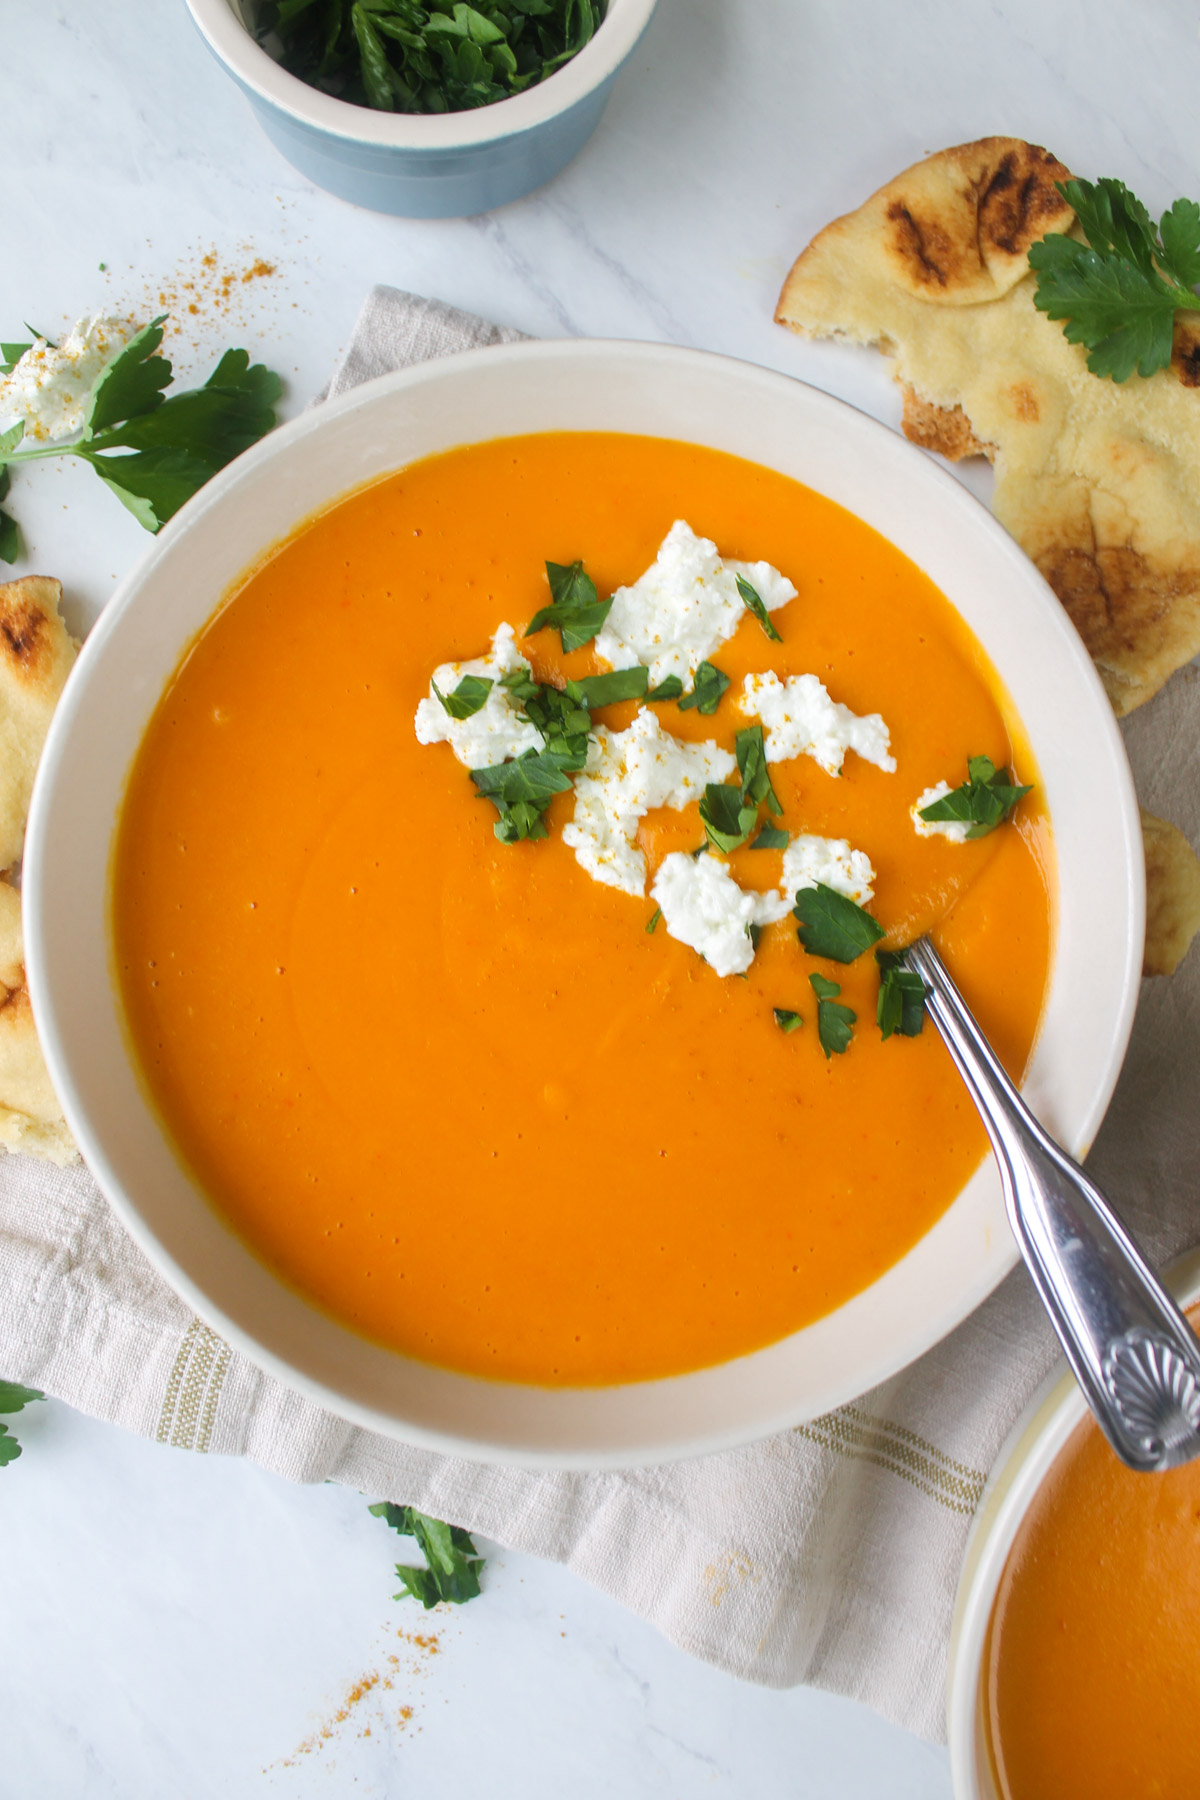 A white bowl of orange pureed soup made from butternut squash and red bell peppers.